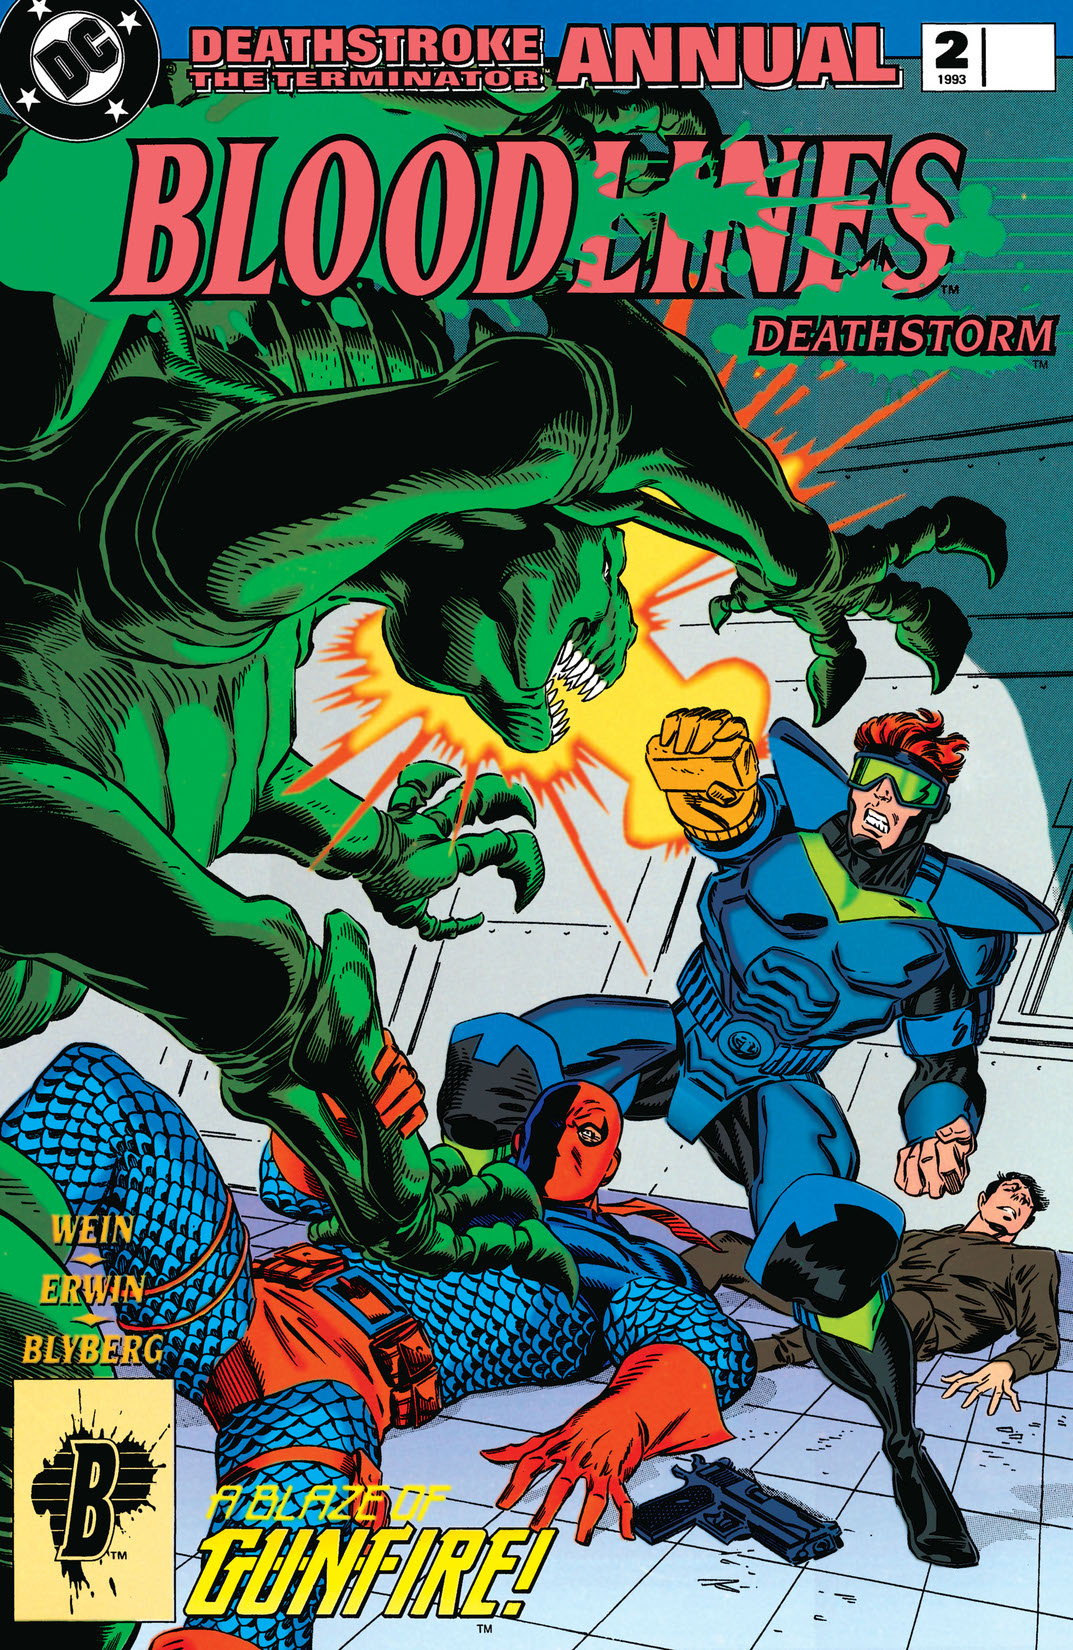 Deathstroke Annual (1992-) #2 preview images